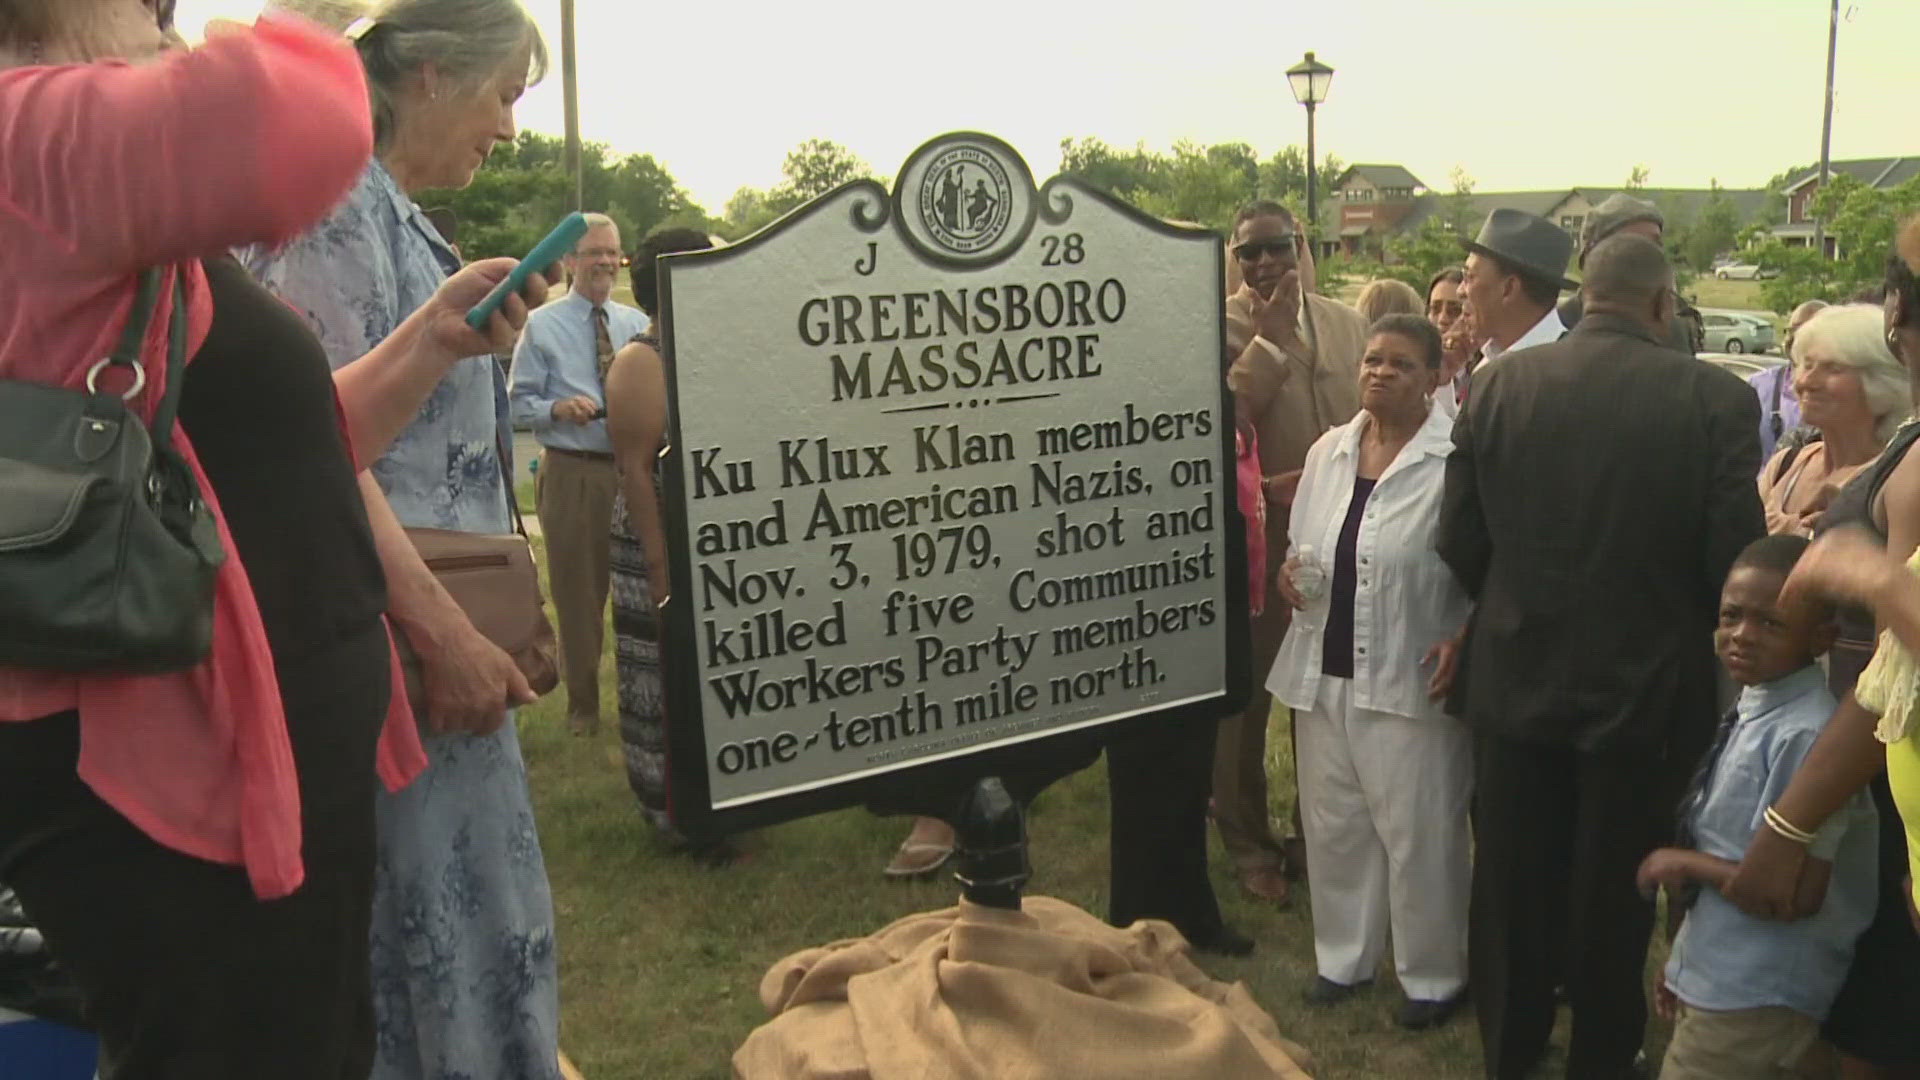 May 25, 2015 the City of Greensboro dedicated a historic marker recognizing the Greensboro Massacre that happened in 1979.